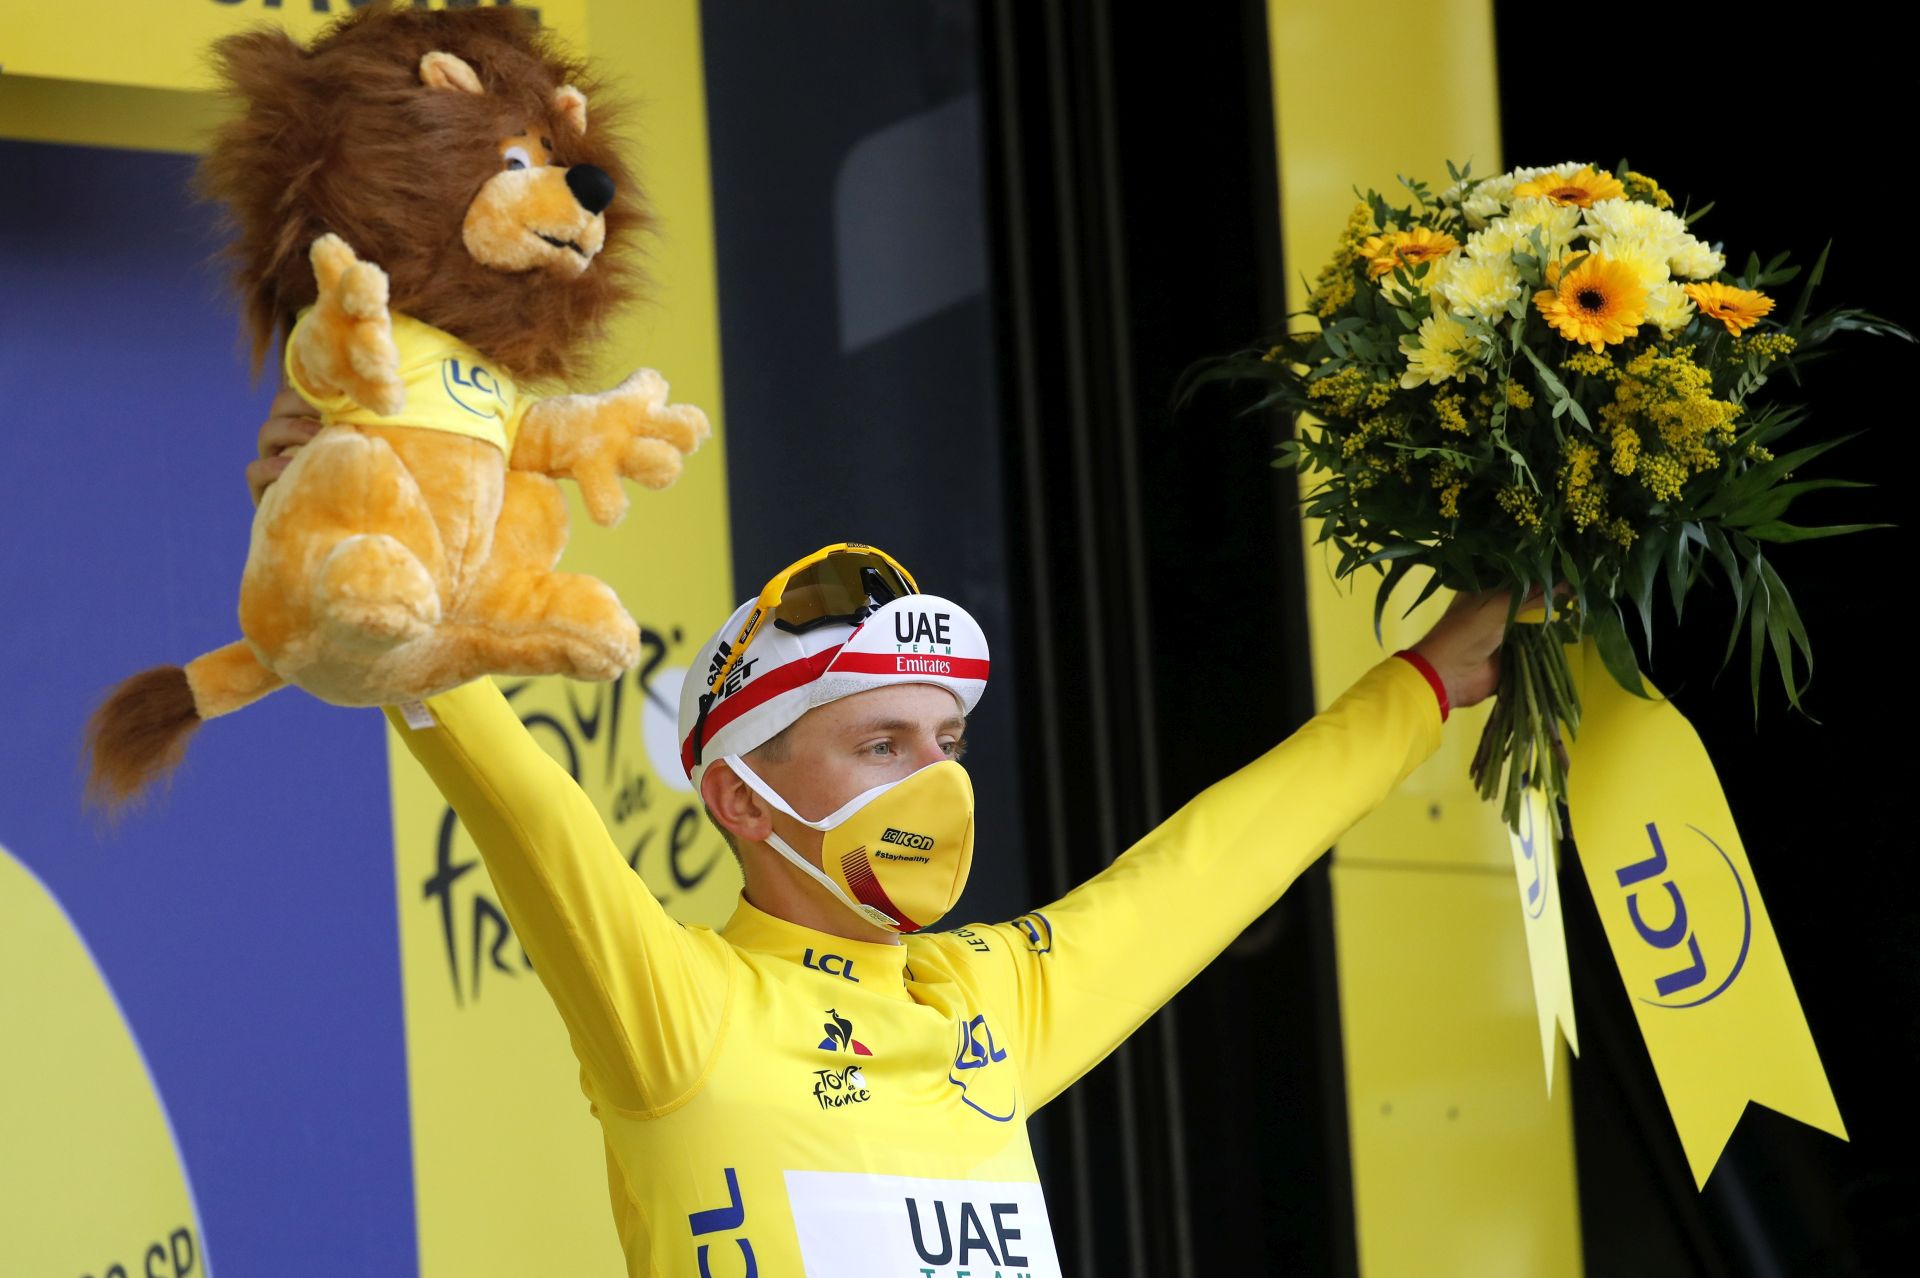 epa08681916 Slovenian rider Tadej Pogacar of the UAE-Team Emirates wearing the overall leader's yellow jersey celebrates on the podium after winning the 20th stage of the Tour de France cycling race, a 36.2km individual time trial from Lure to La Planche des Belles Filles, France, 19 September 2020.  EPA/Christophe Ena / Pool